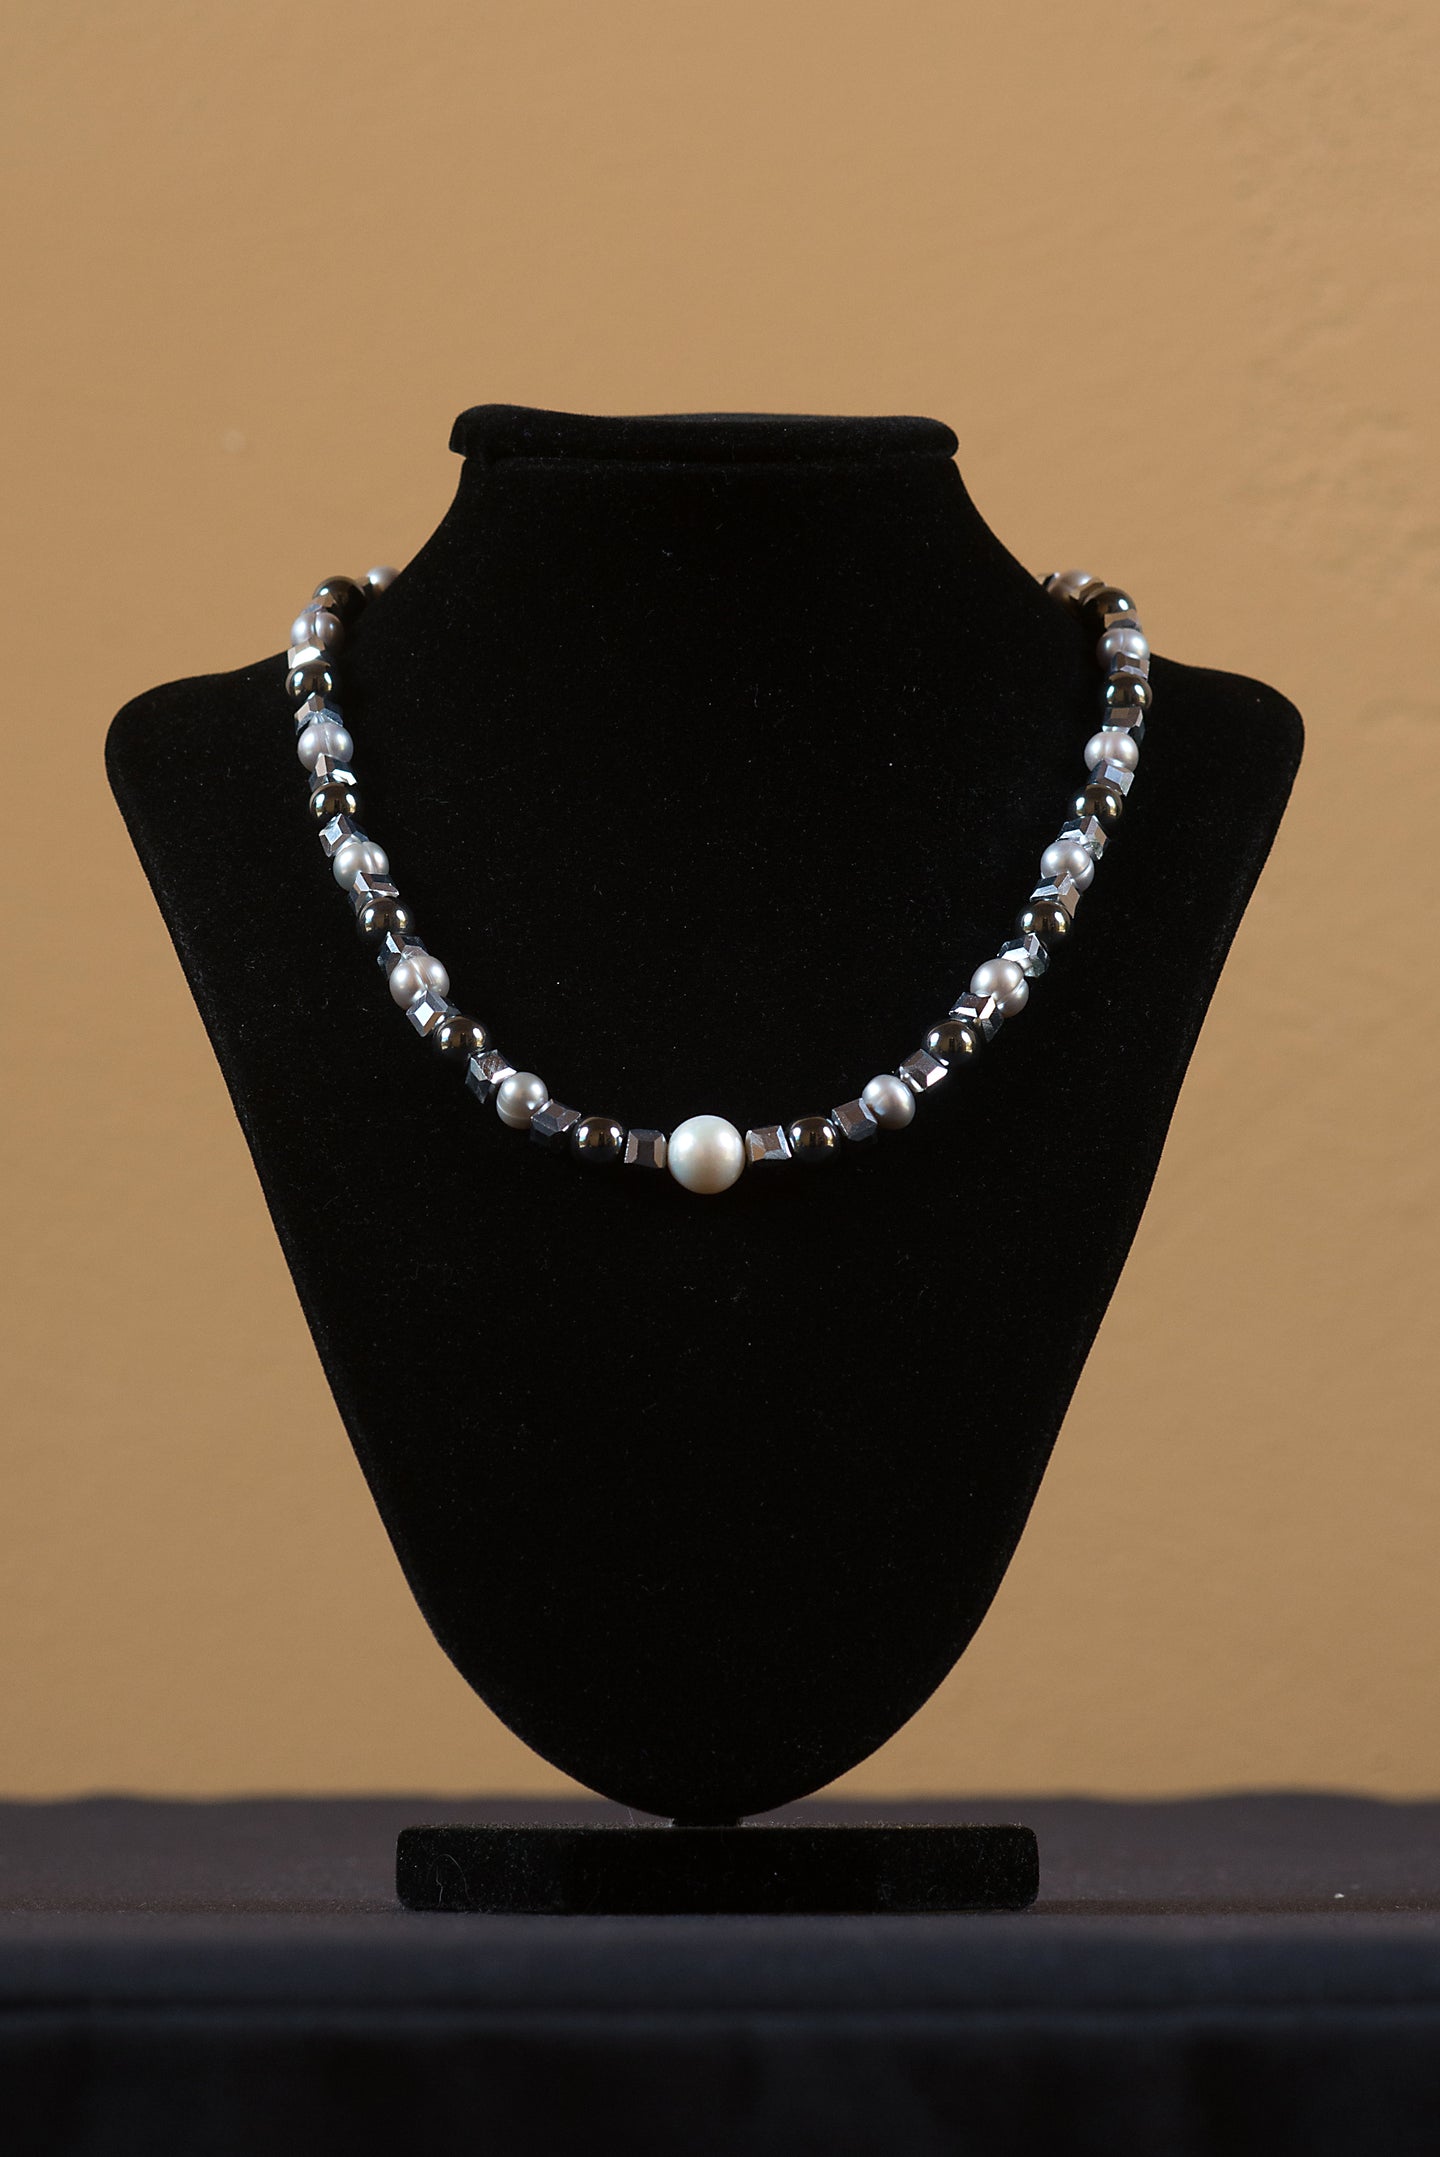 Necklace - White Pearl, Grey Pearls, Hematite, & Glass Mirrored Cubes